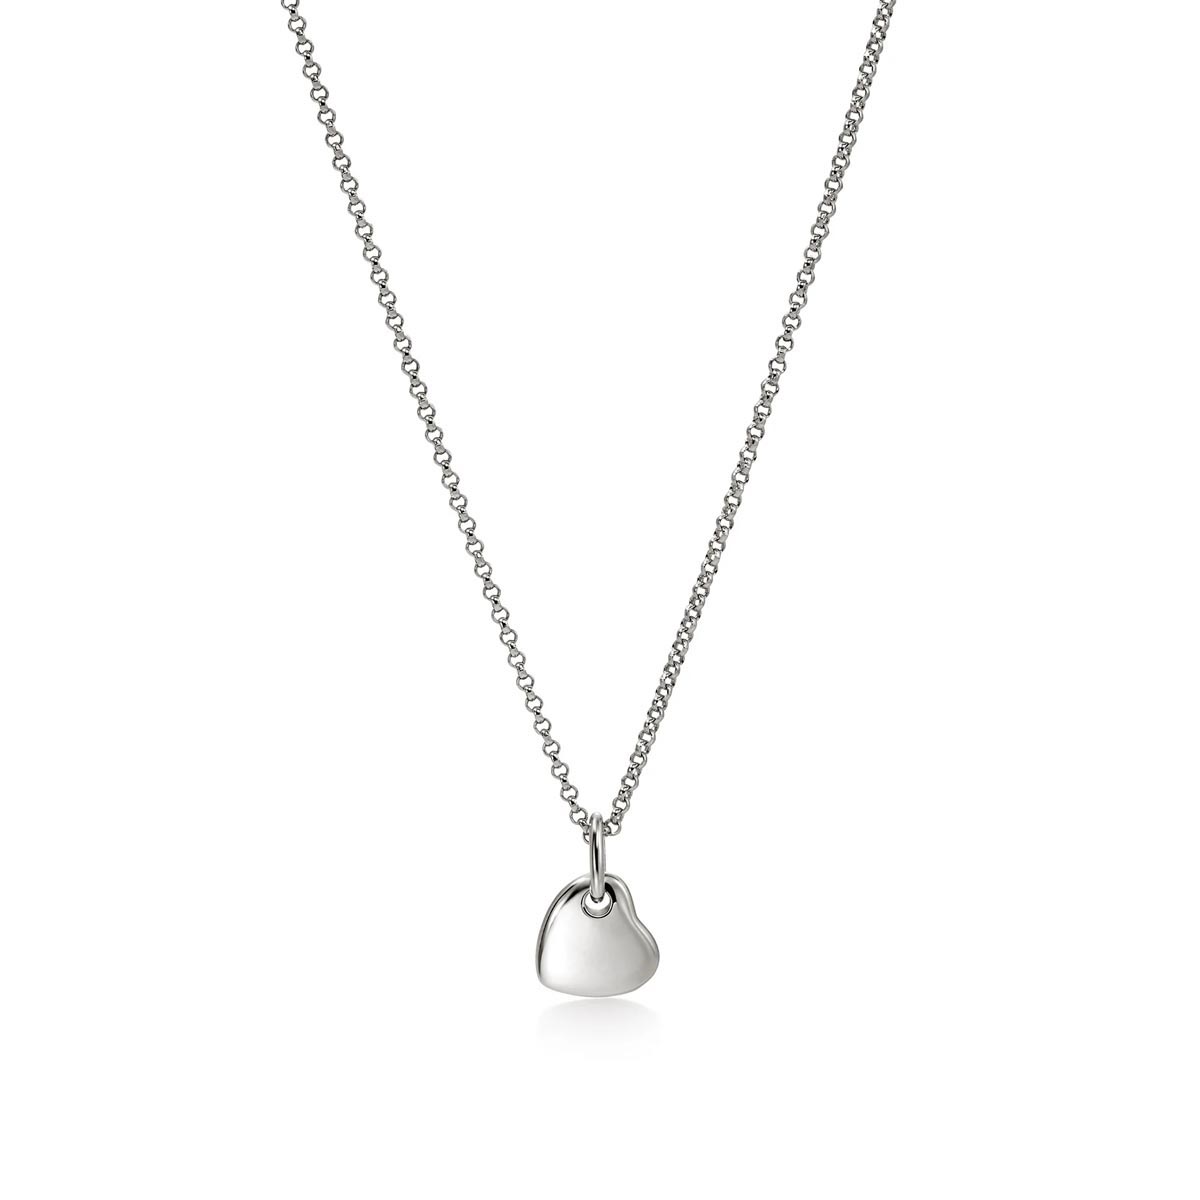 John Hardy Pebble Collection Diamond Heart Necklace in Sterling Silver (1/7ct tw)